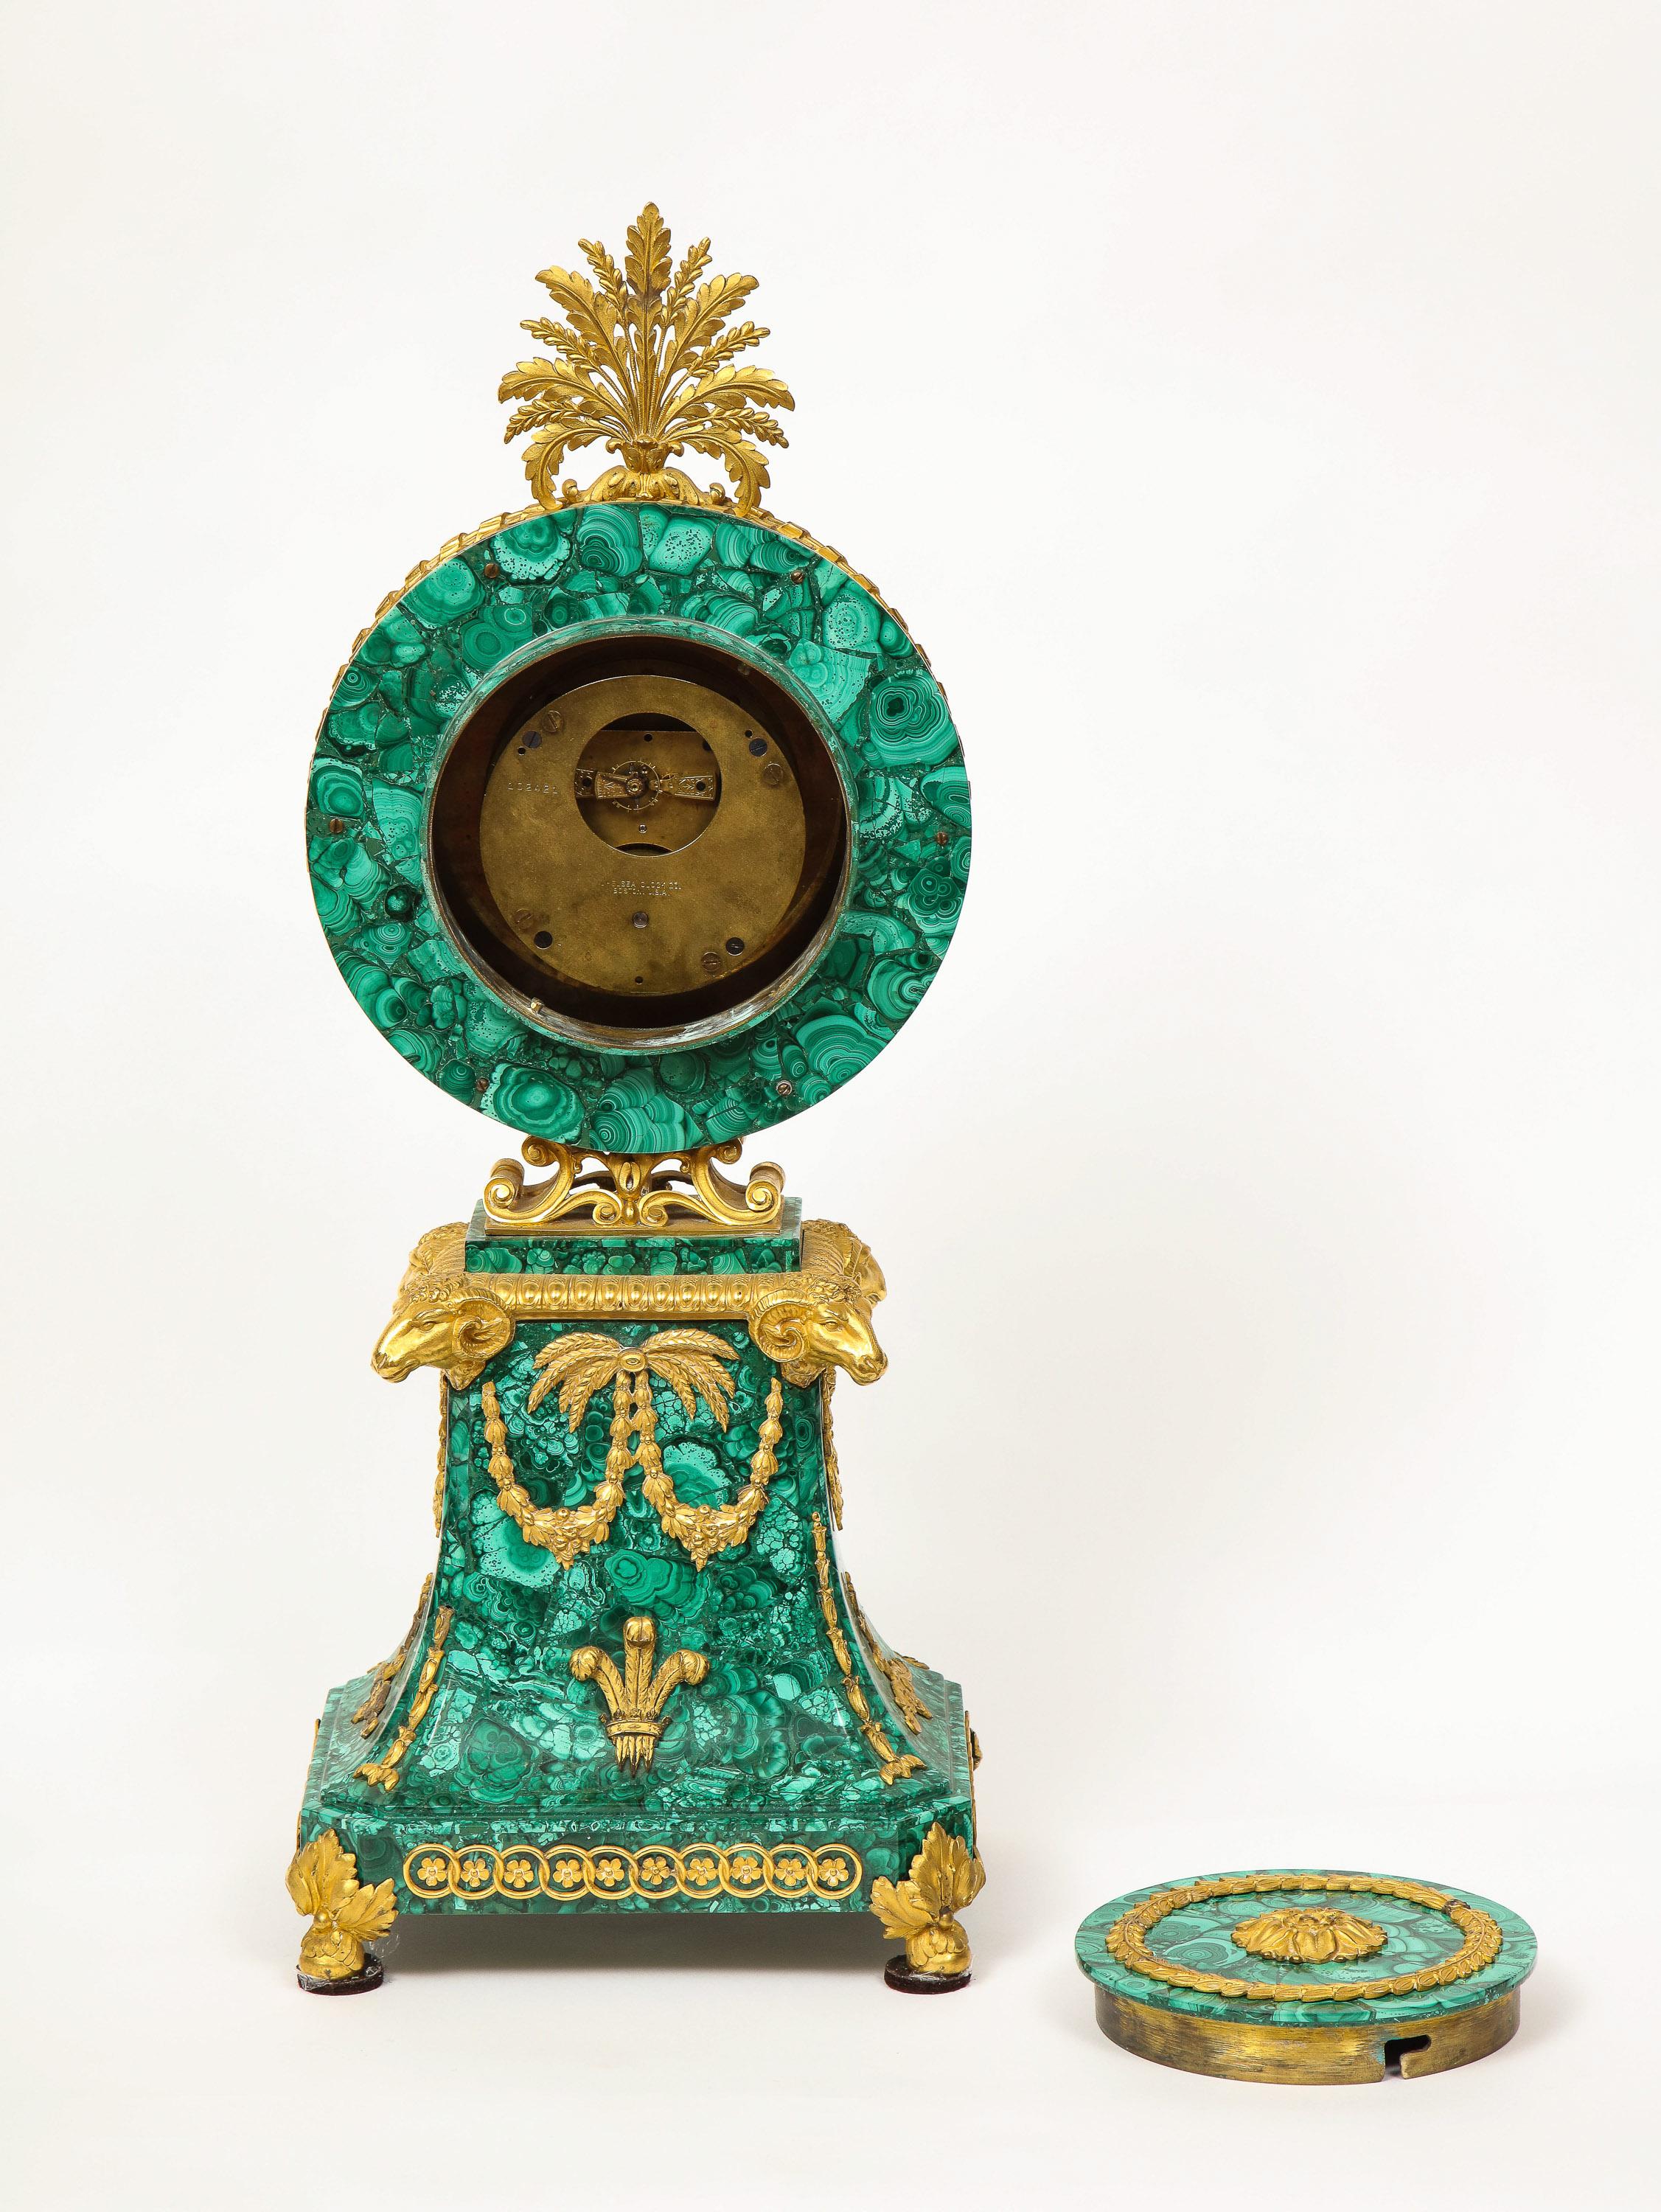 Edward F. Caldwell, An Extremely Fine and Rare Ormolu-Mounted Malachite Clock For Sale 6